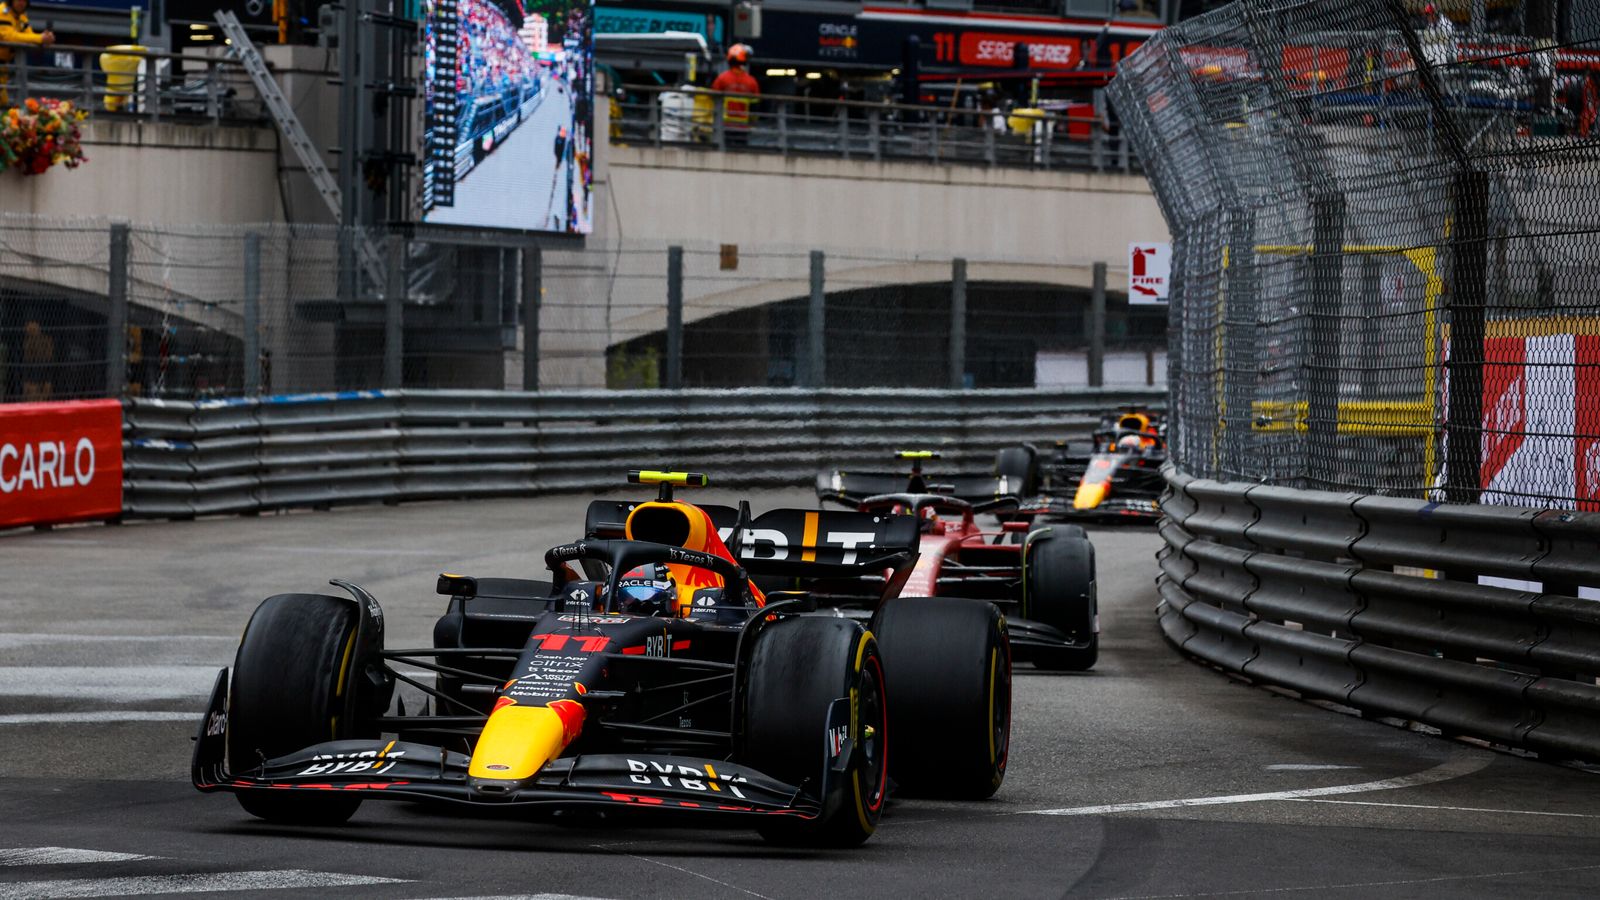 Monaco Grand Prix: Will Red Bull's F1 winning streak come to an end and why could McLaren make an impact?